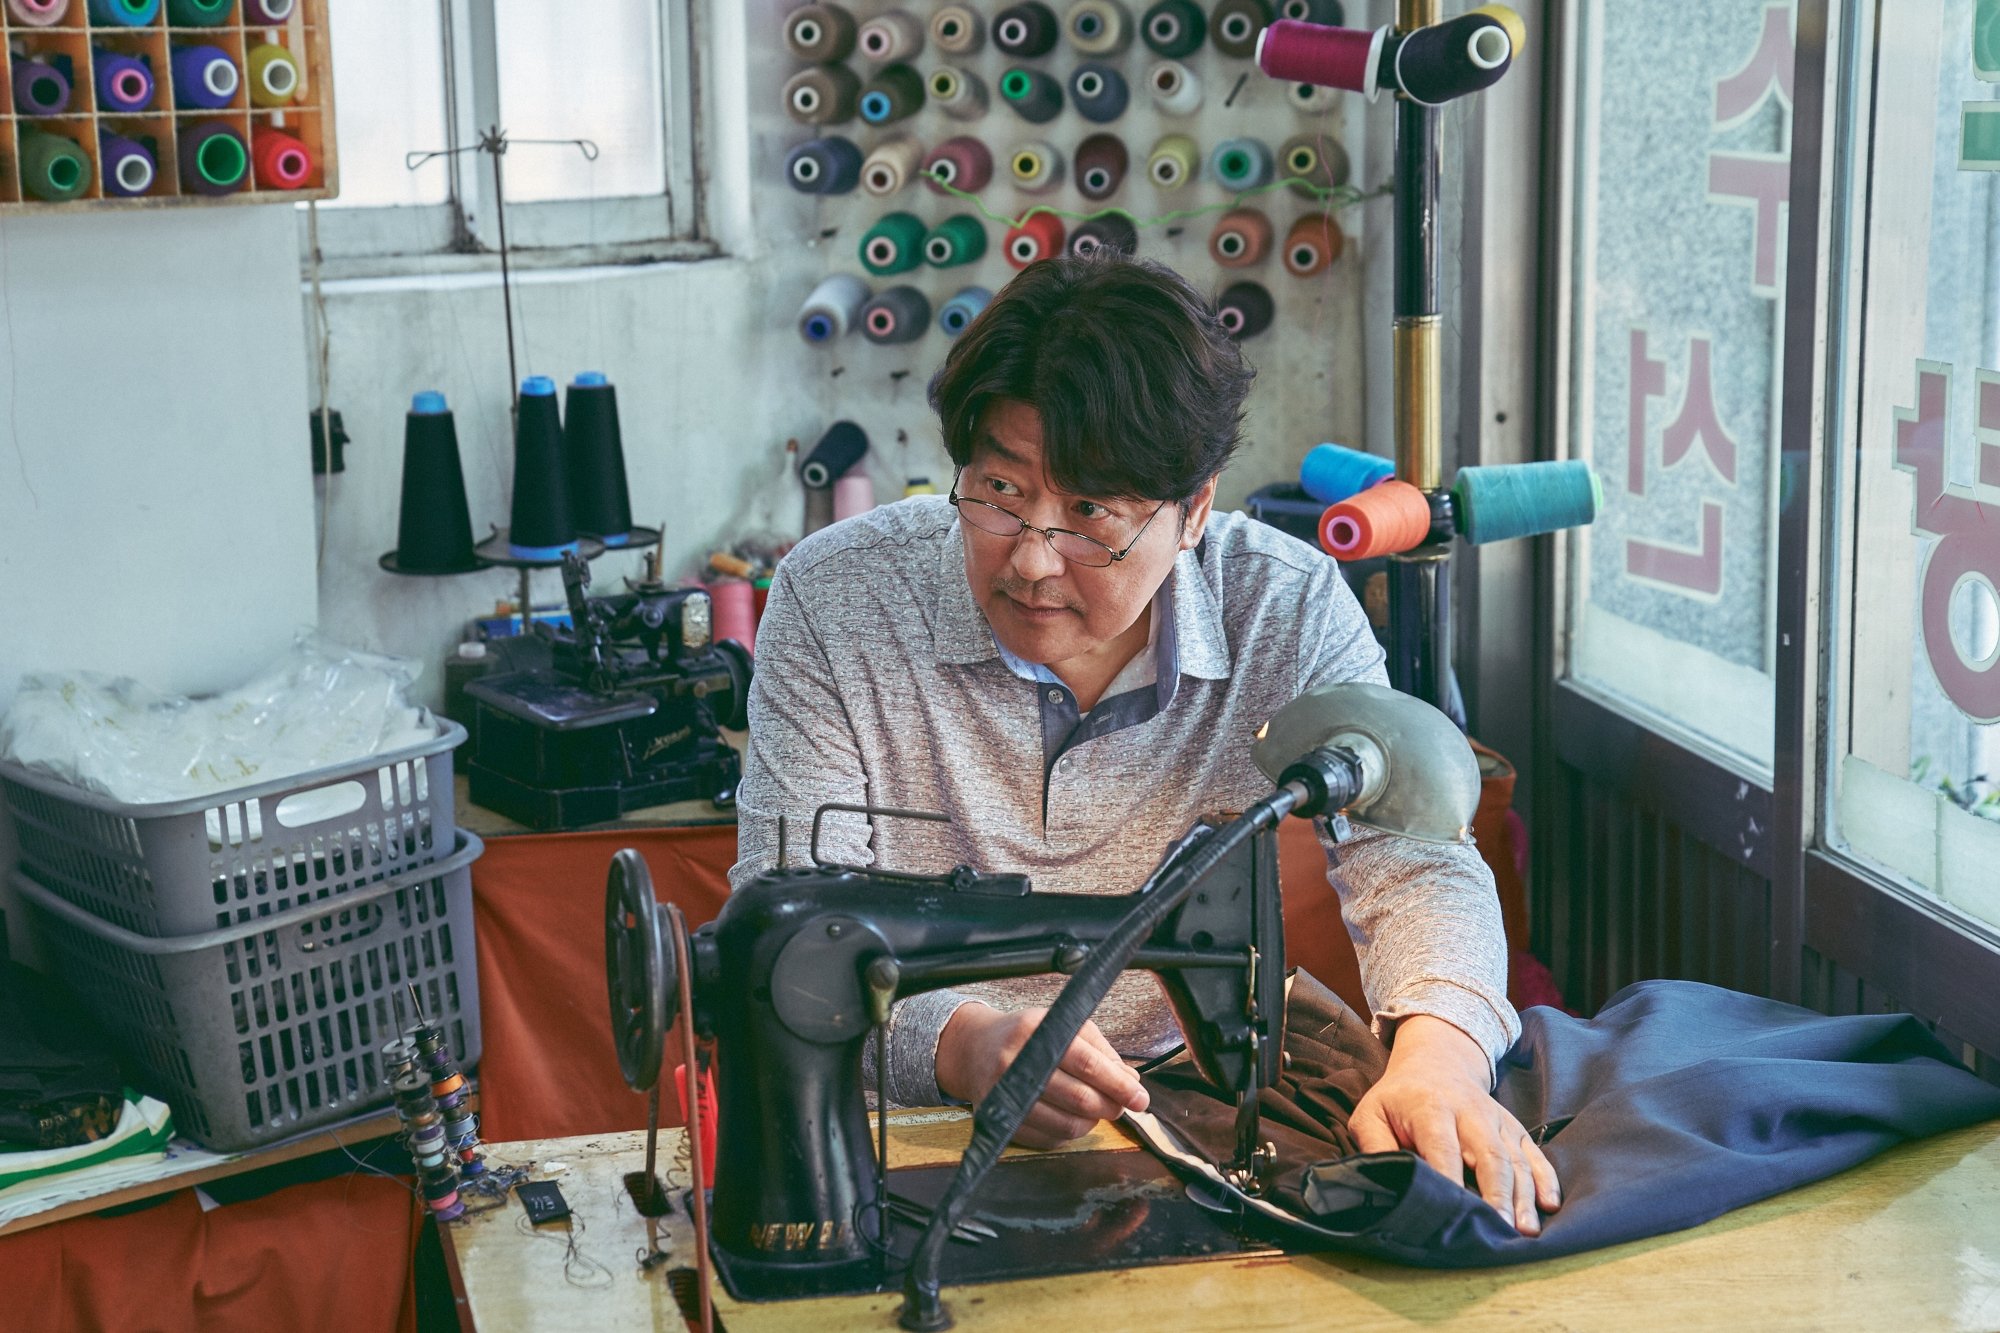 'Broker' Song Kang-ho as Sang-hyeon looking from under his glasses while he's working at a sewing machine